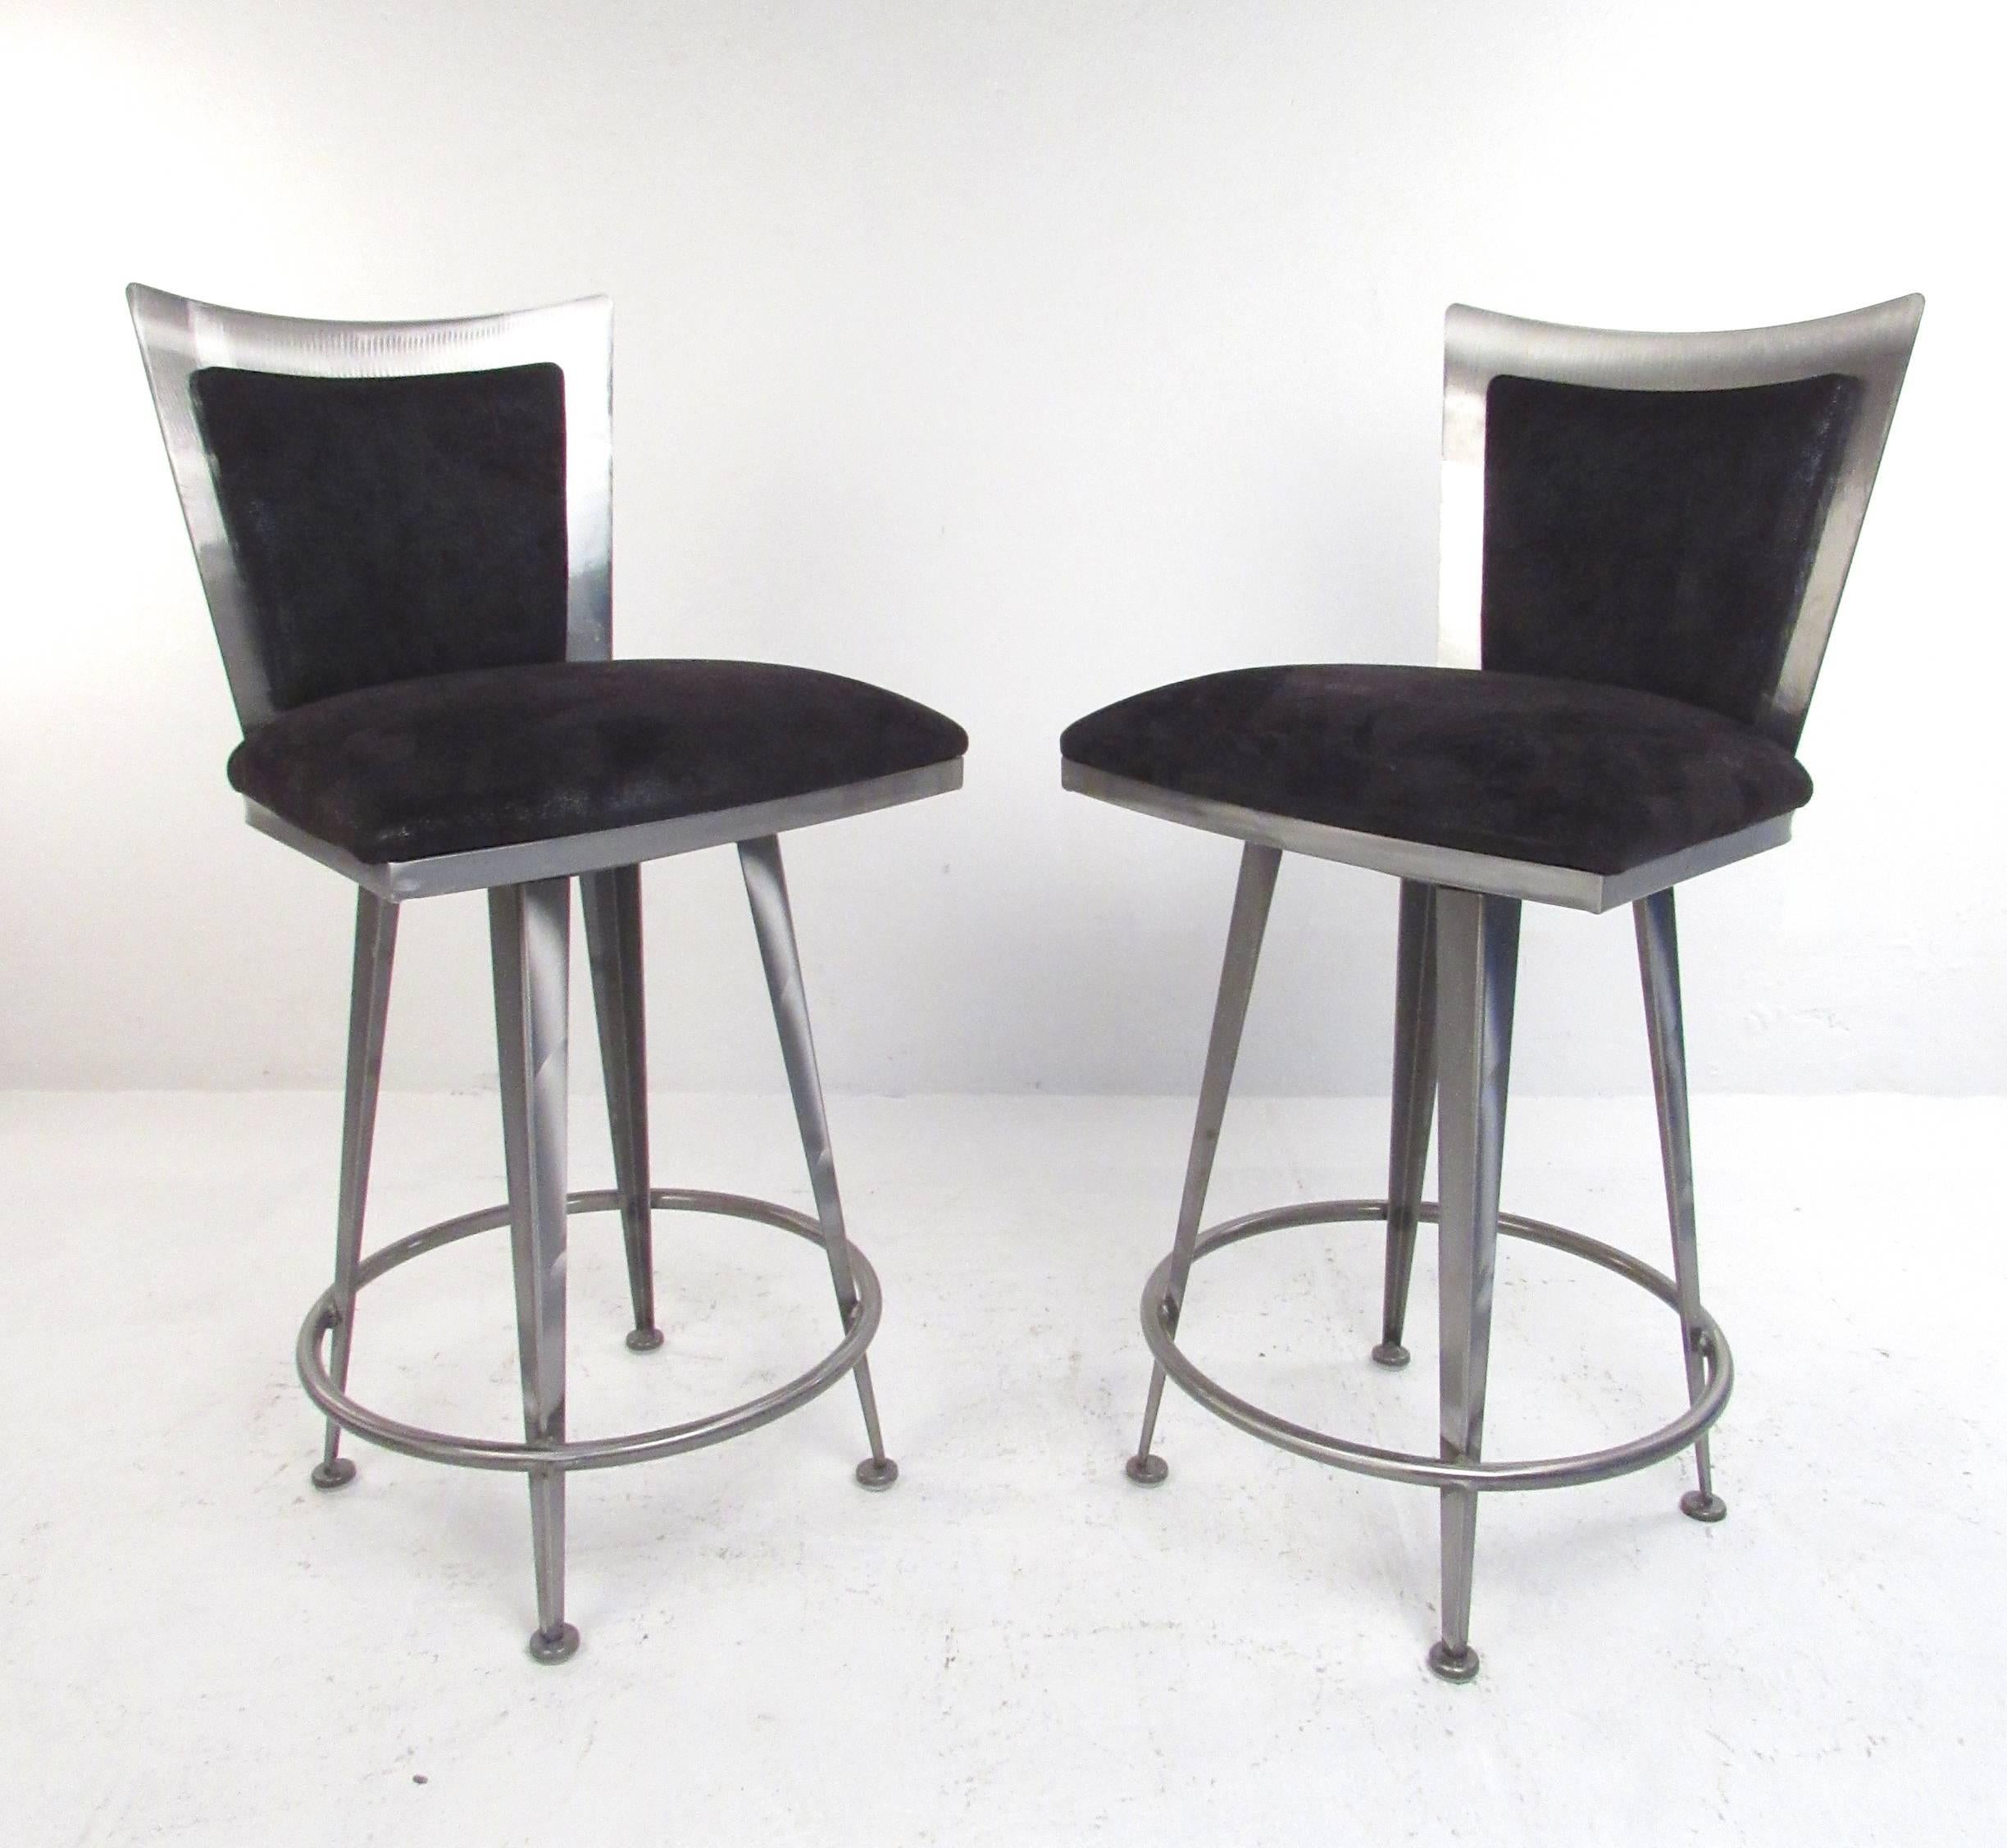 This unique set of three heavy metal barstools features a shapely Italian style design with plush upholstered seats. Swivel seats, tapered legs and circular footrest add to the stylish modern appeal of the stools. Please confirm item location (NY or